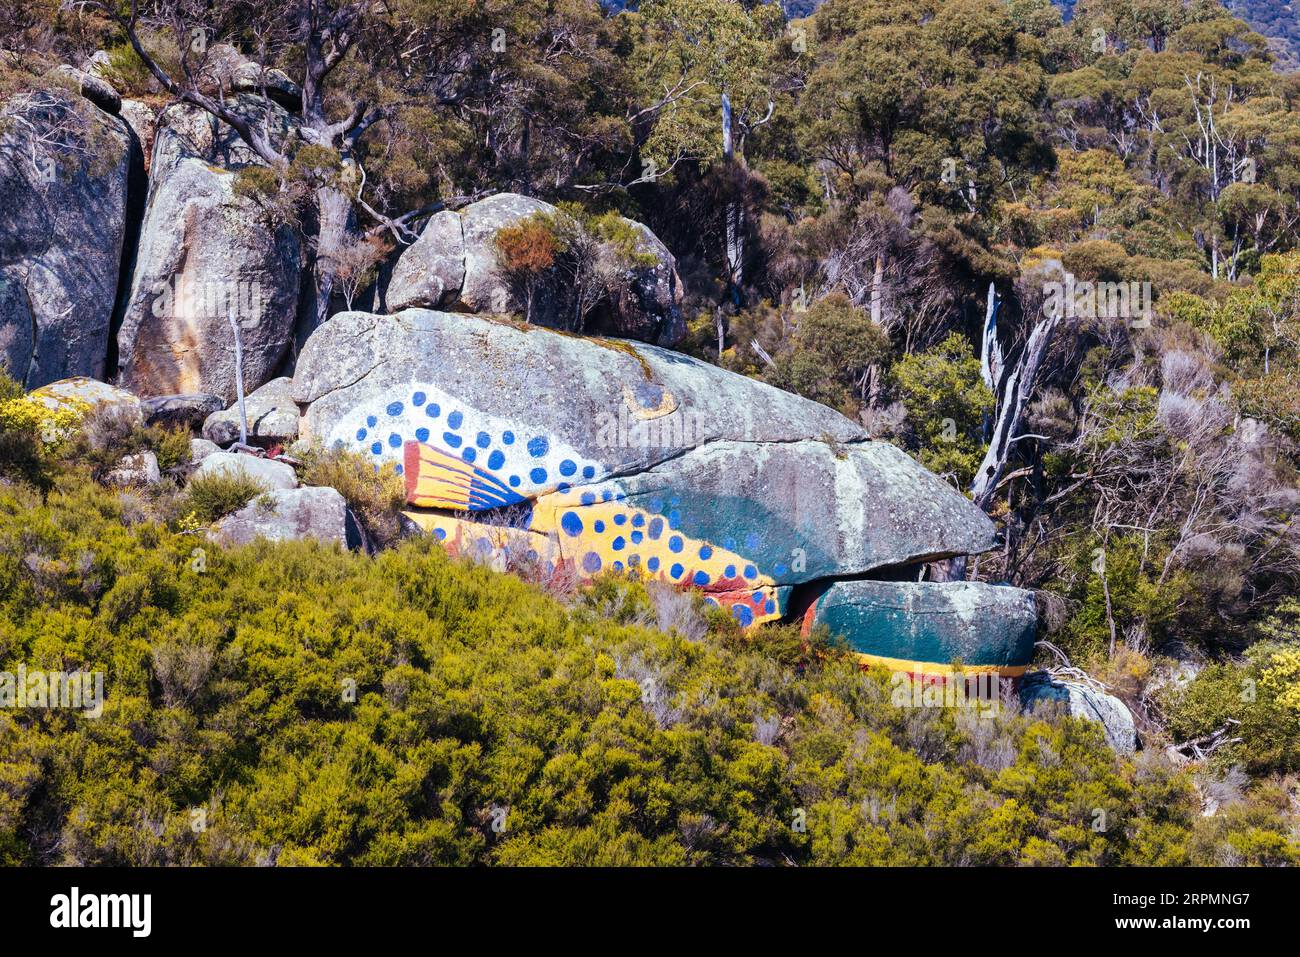 DERBY, AUSTRALIA, SEPTEMBER 23, 2022: Aboriginal fish painting on rock and surrounding landscape in the rural town of Derby on a cold spring morning Stock Photo